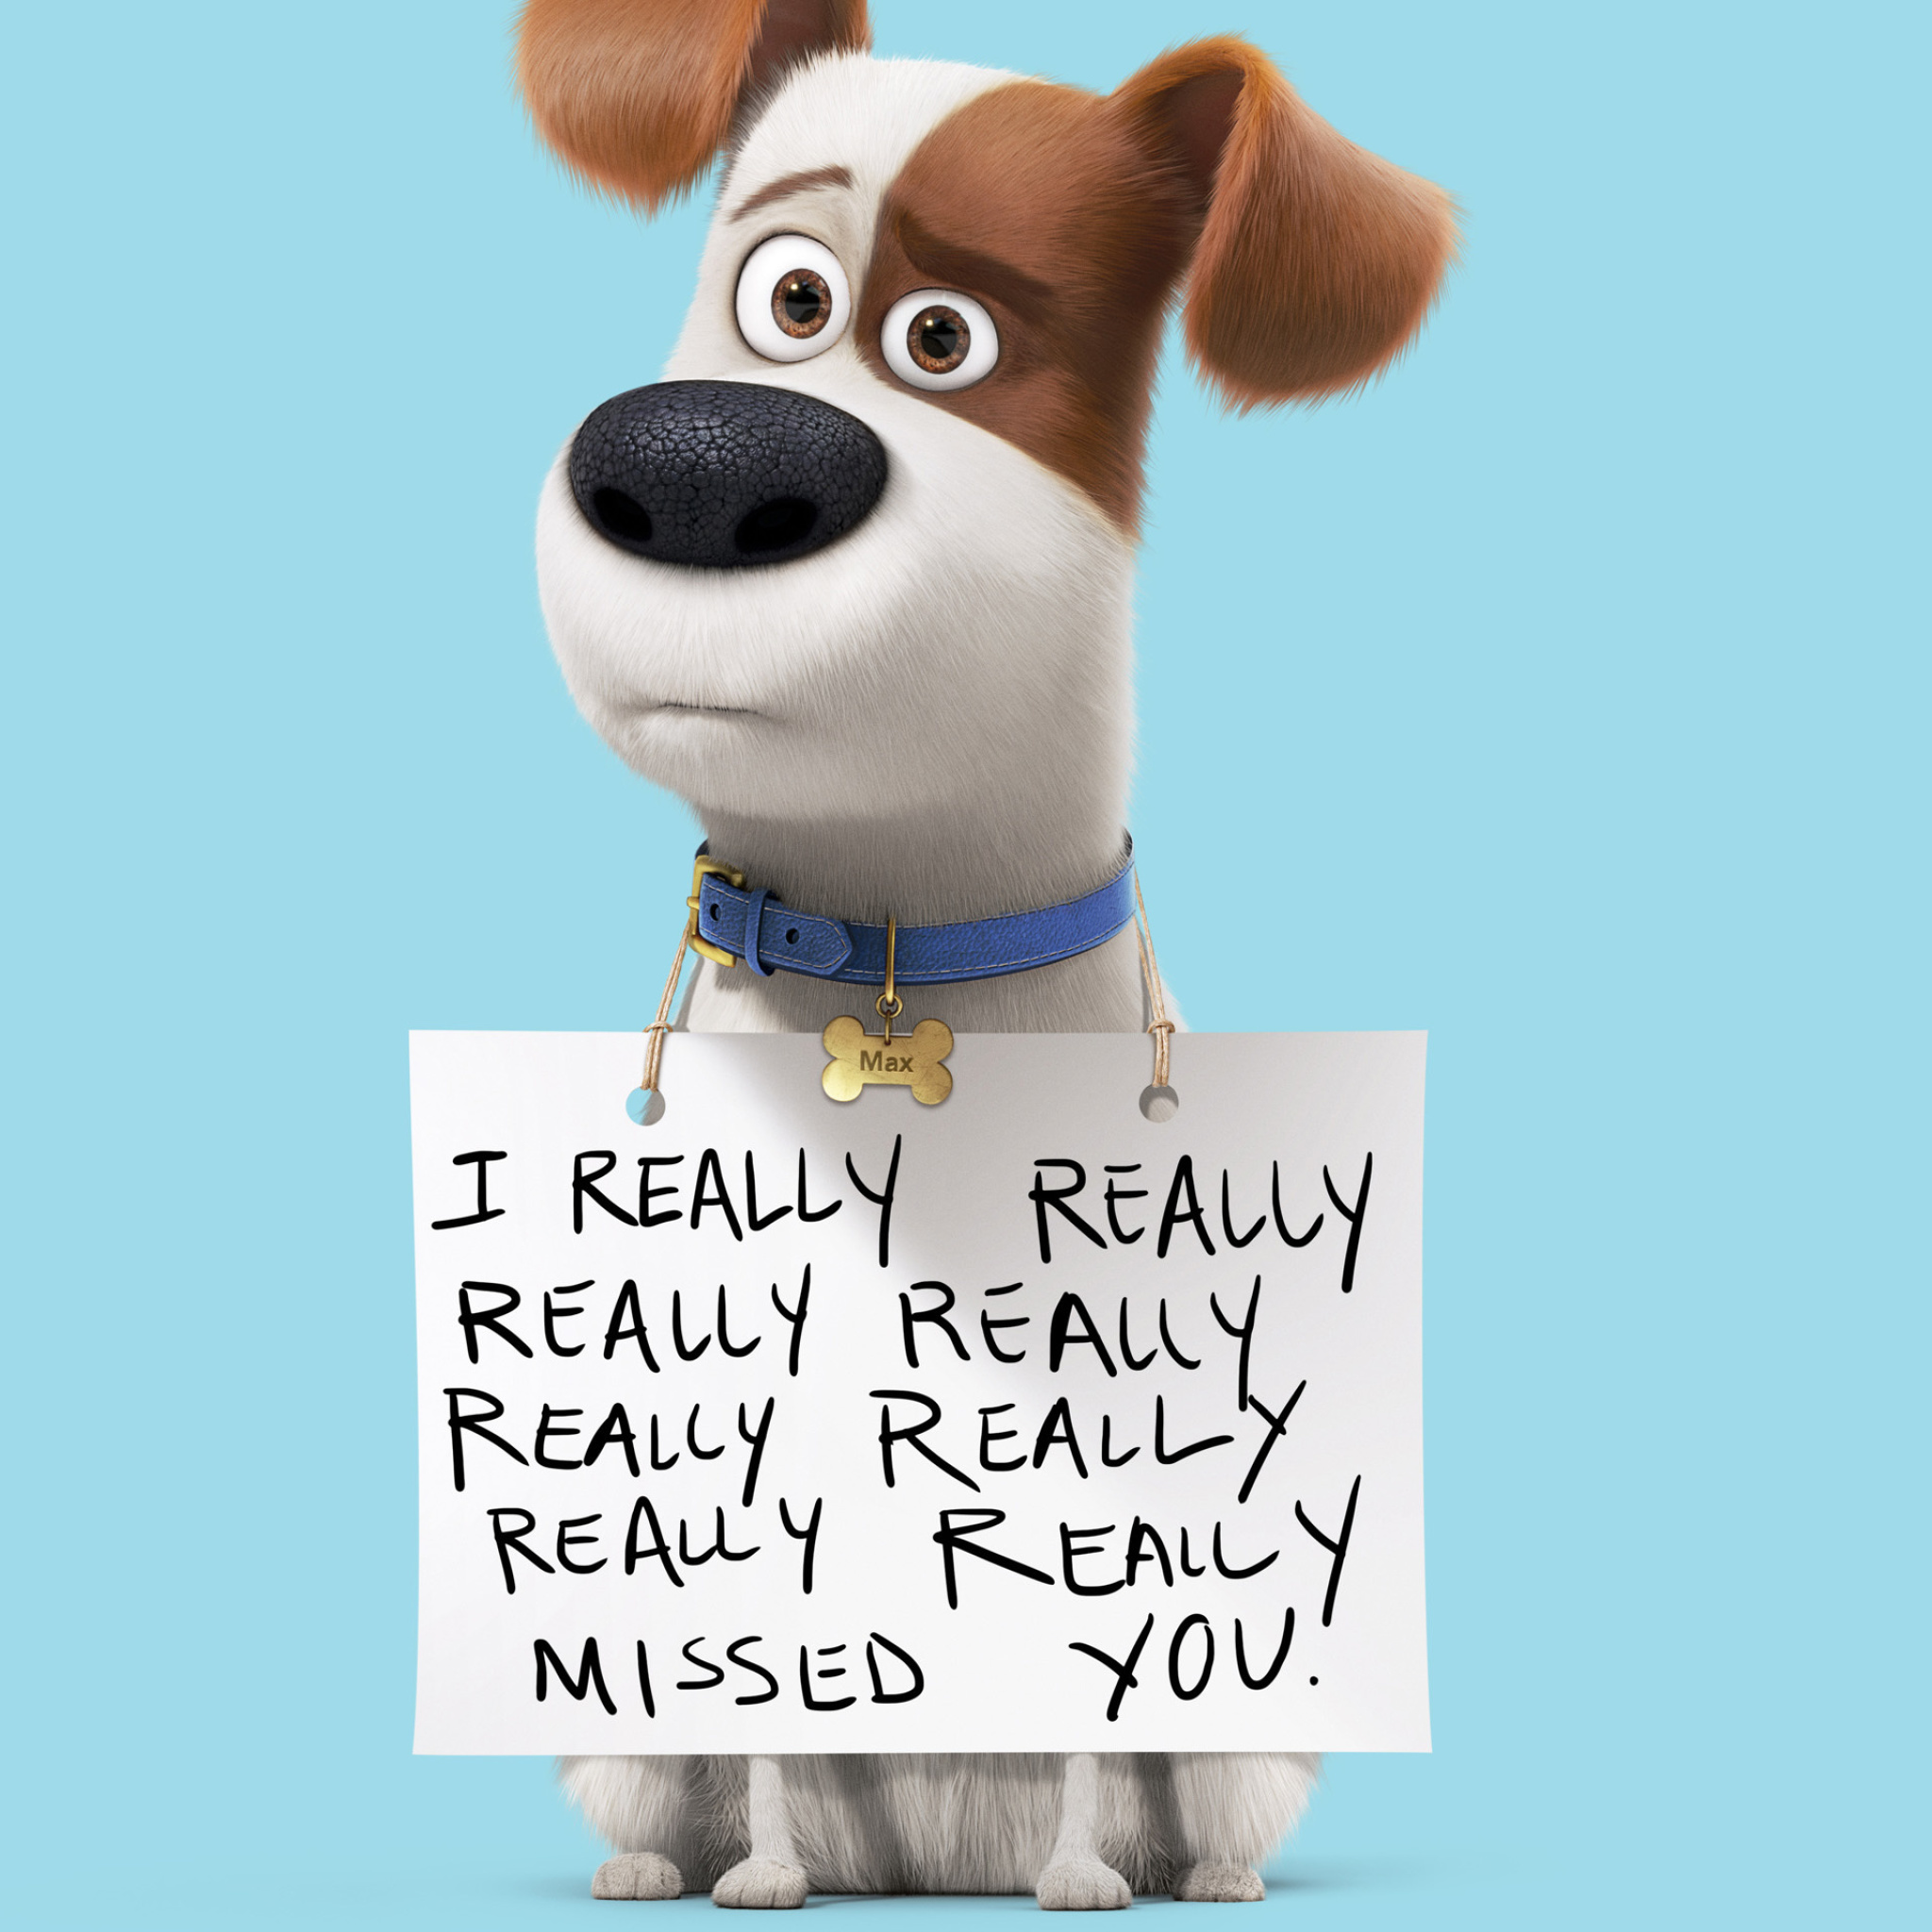 Max from The Secret Life of Pets wallpaper 2048x2048